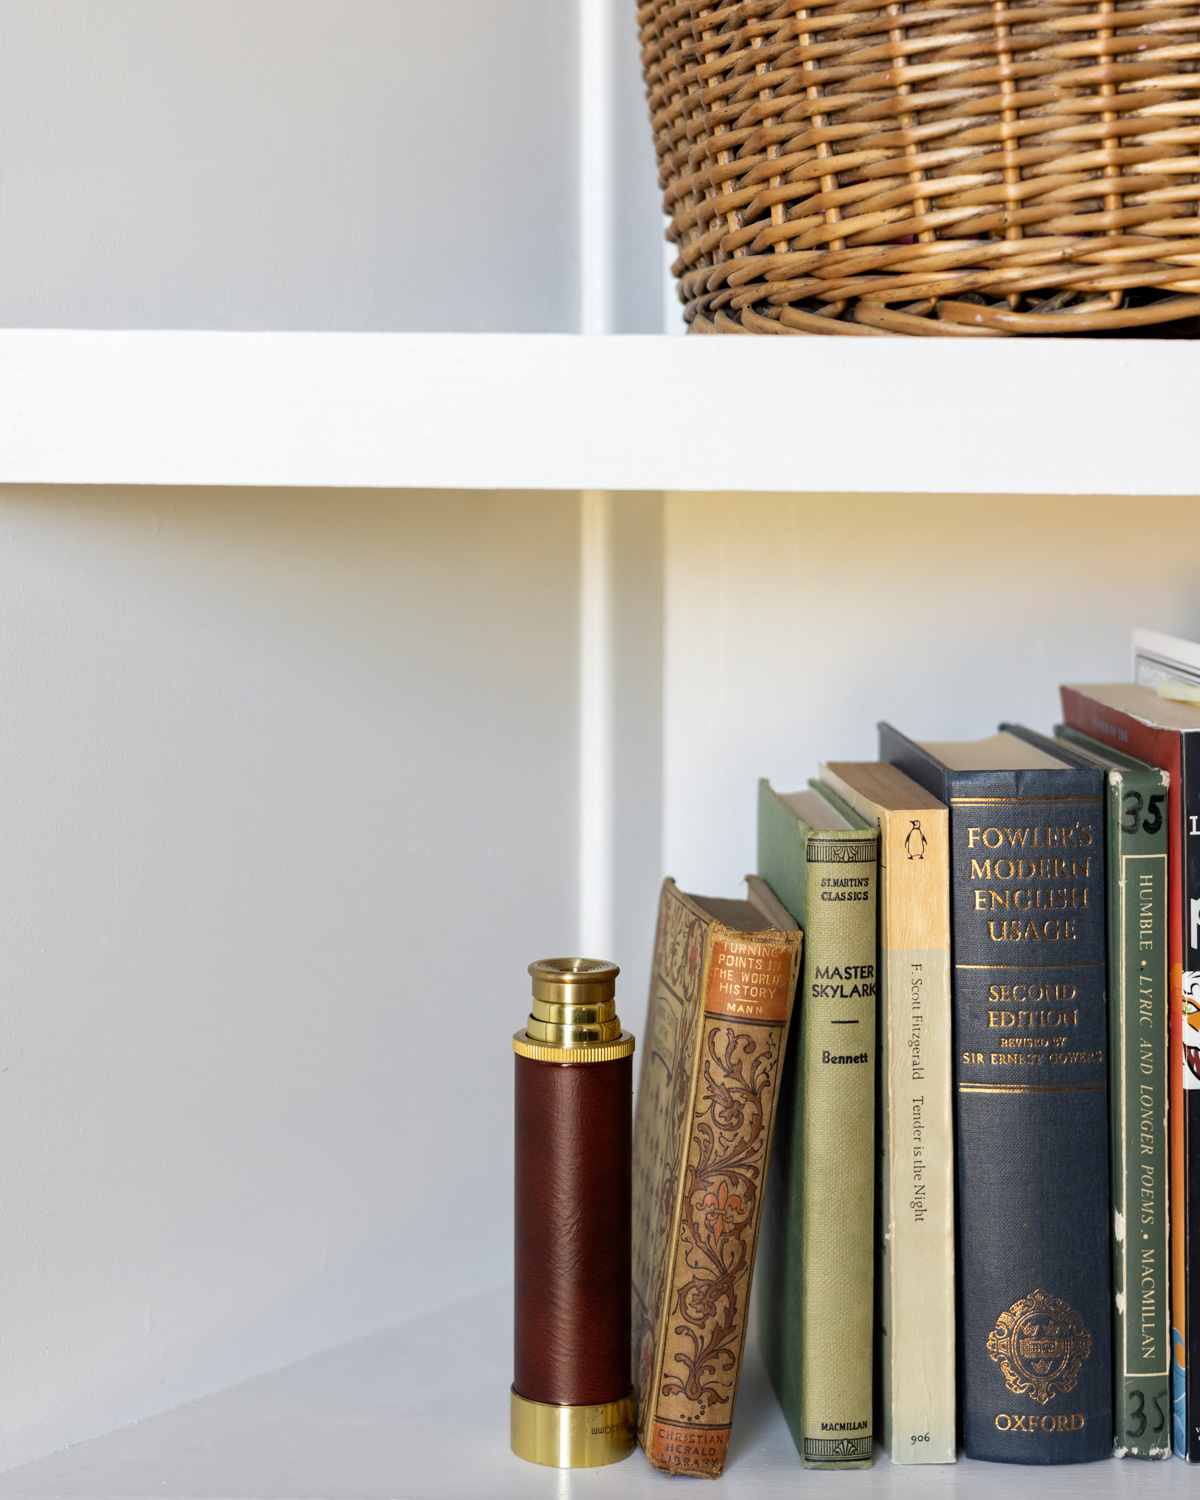 Old books on a shelf with a brass telescope and vintage basket are classic elements of the bookshelf wealth trend.